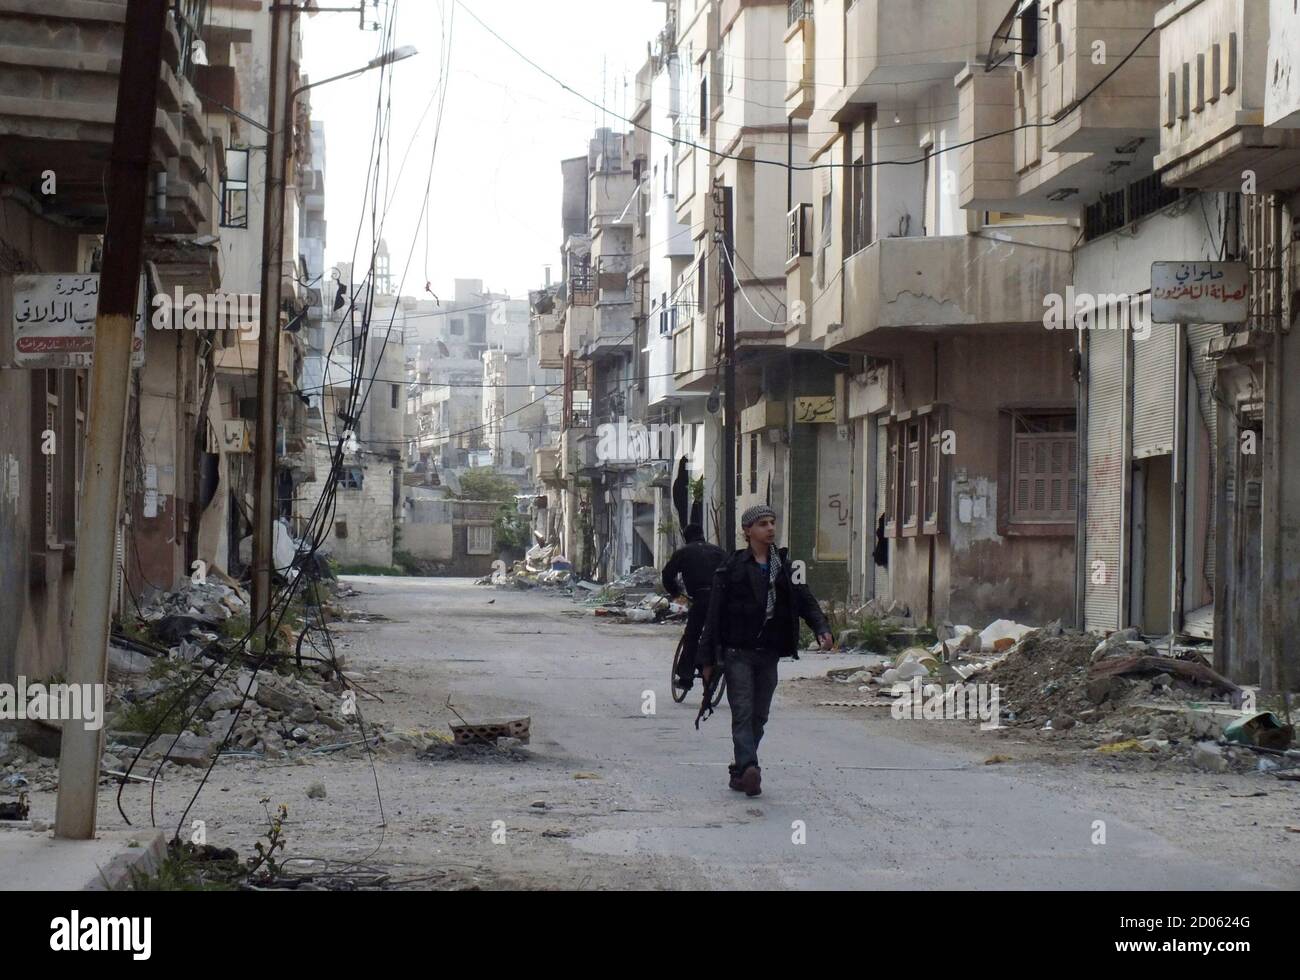 A Free Syrian Army fighter carries his weapon as he walks along a street lined with damaged buildings in Jouret al Shayah area in Homs, April 8, 2013. REUTERS/Yazan Homsy (SYRIA - Tags: POLITICS CIVIL UNREST) Stock Photo